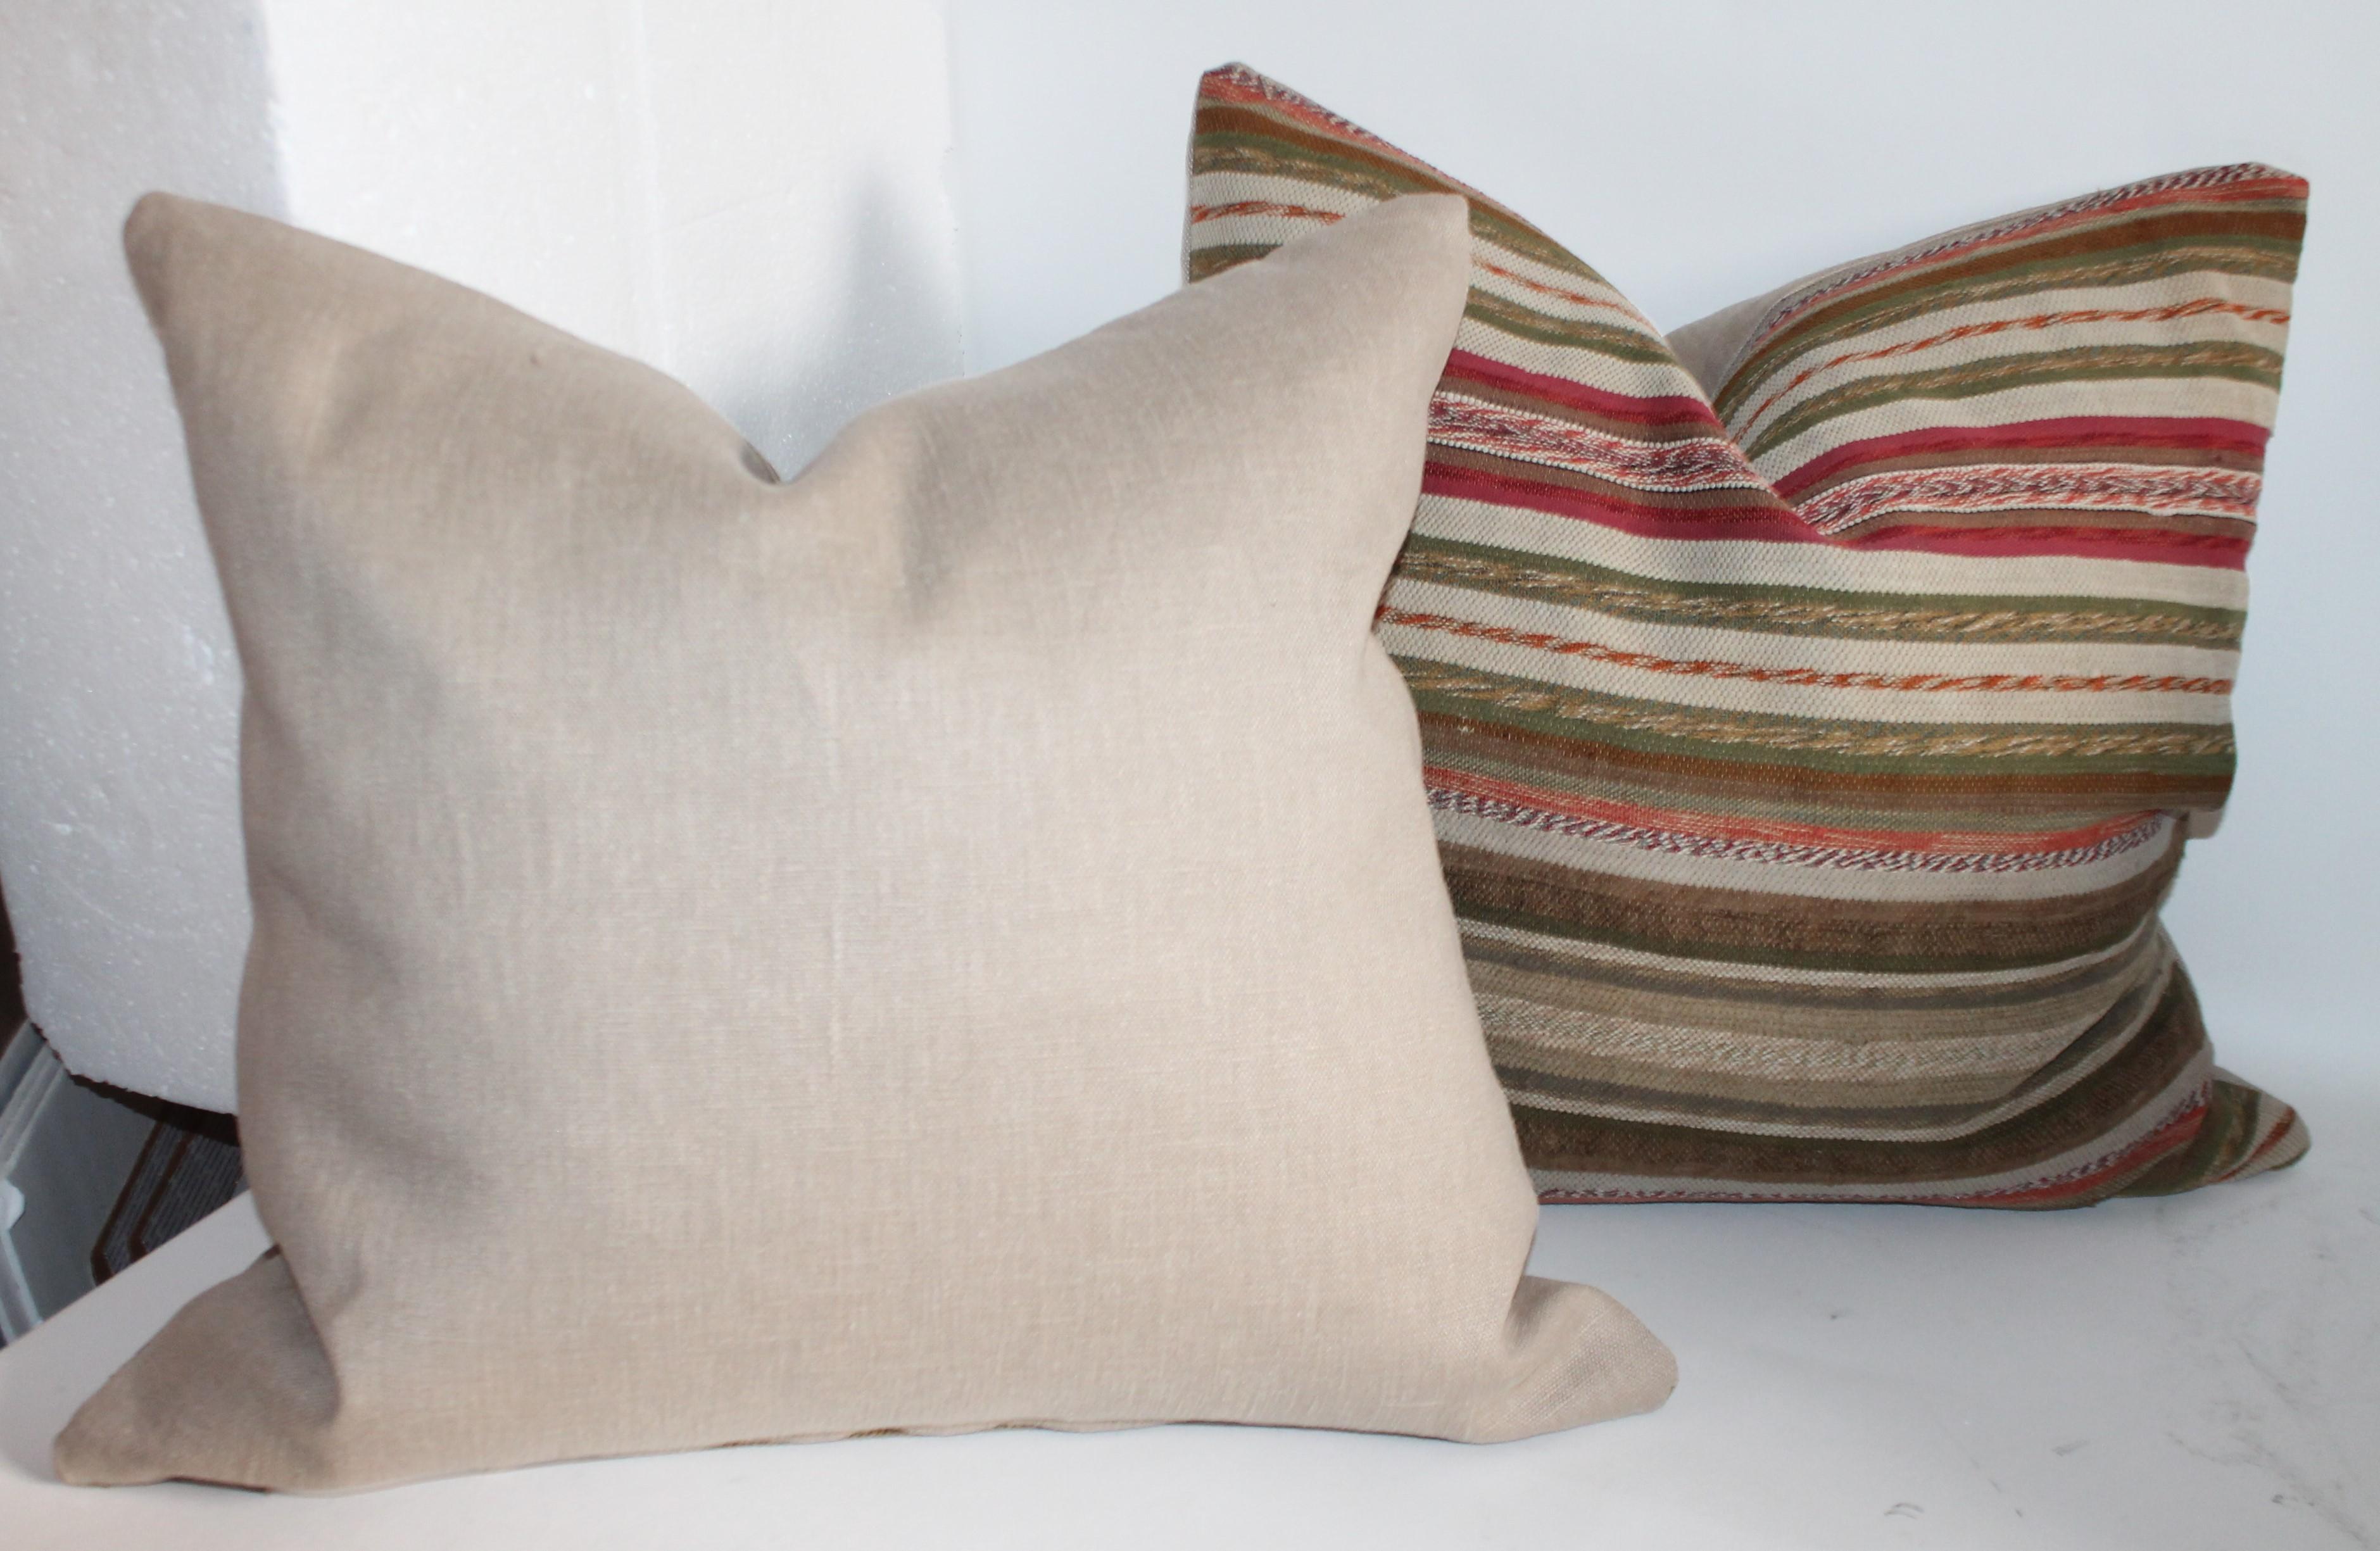 These fantastic early New England rag rug pillows are in fantastic condition and have taupe cotton linen backings. Sold as a pair. Two pairs in stock.